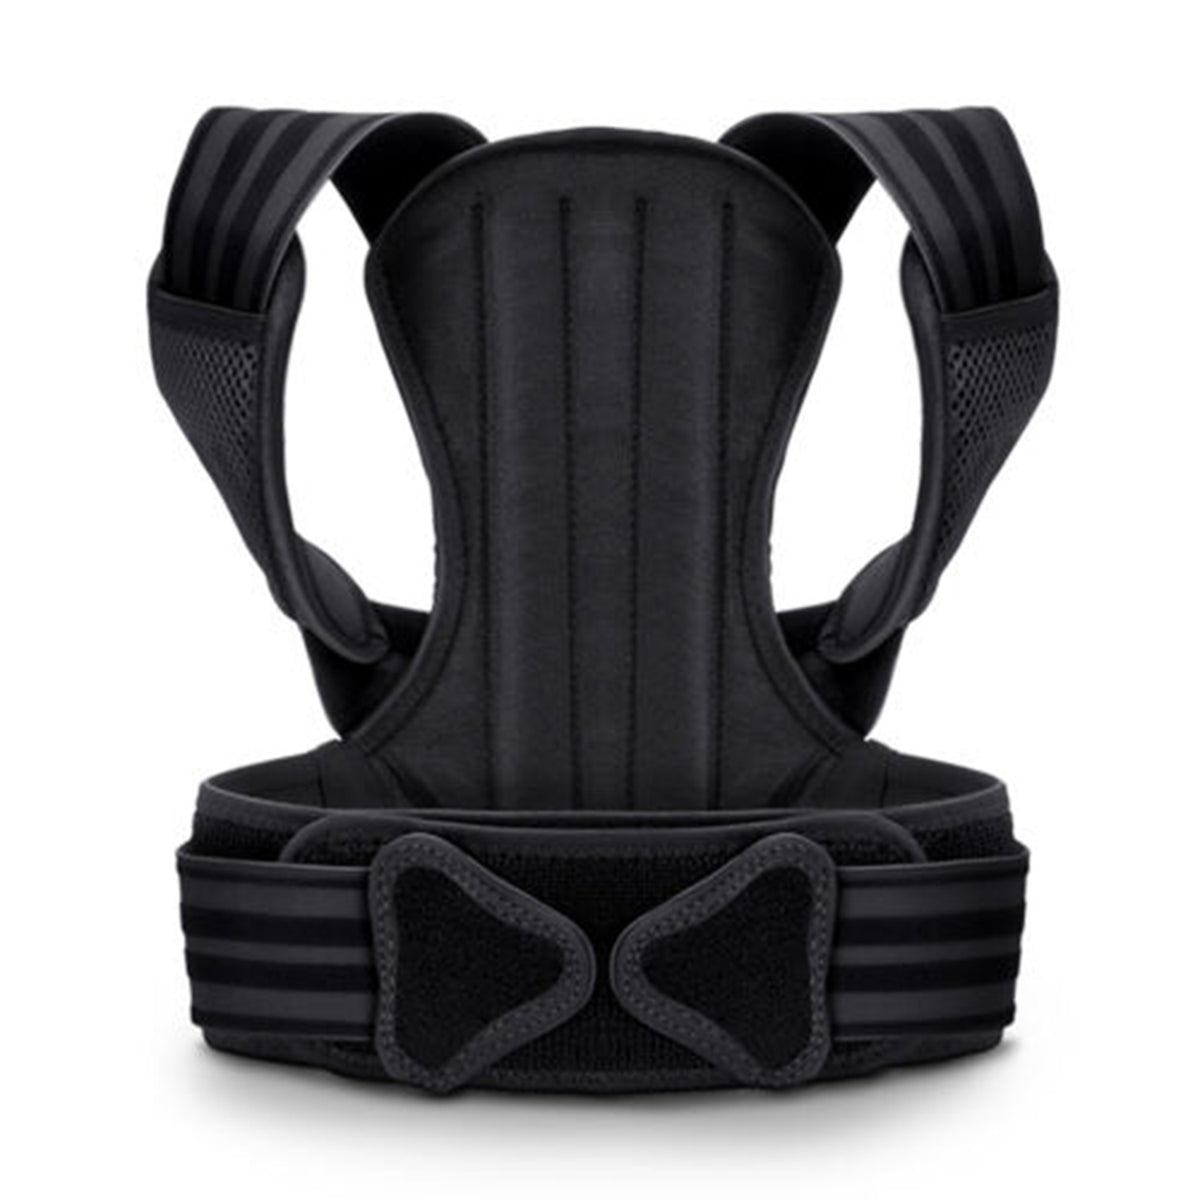 MERCASE POSTURE SUPPORT NEW BLACK XL IMPROVE YOUR POSTURE BACK SUPPORT!!!